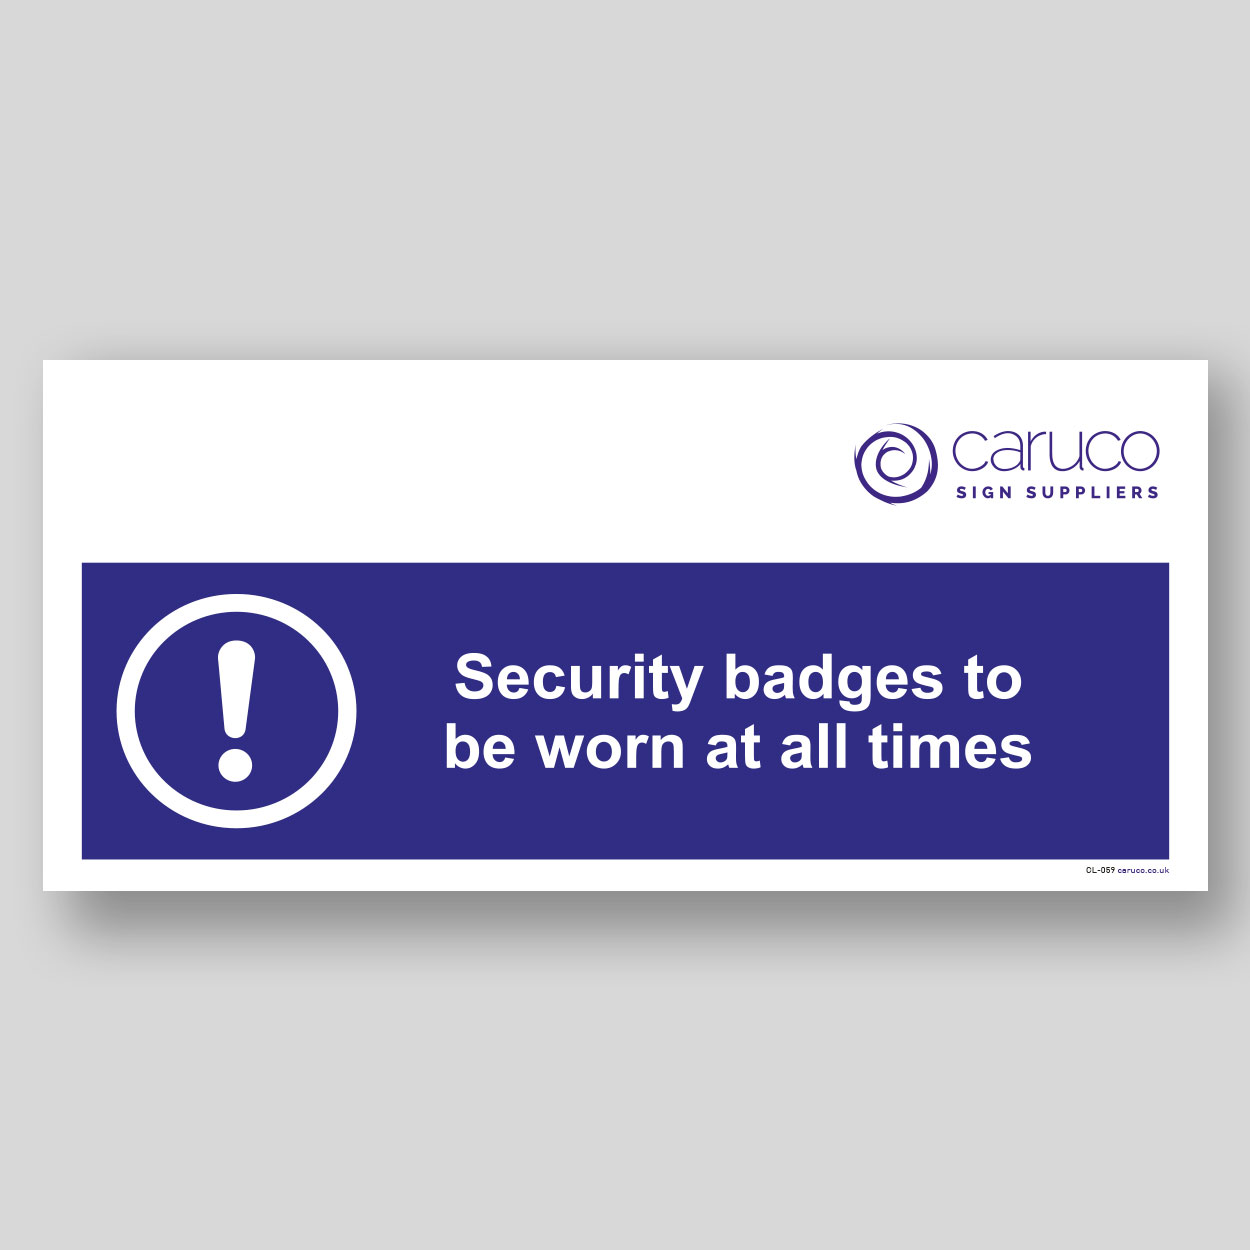 CL-059 Security badges to be worn